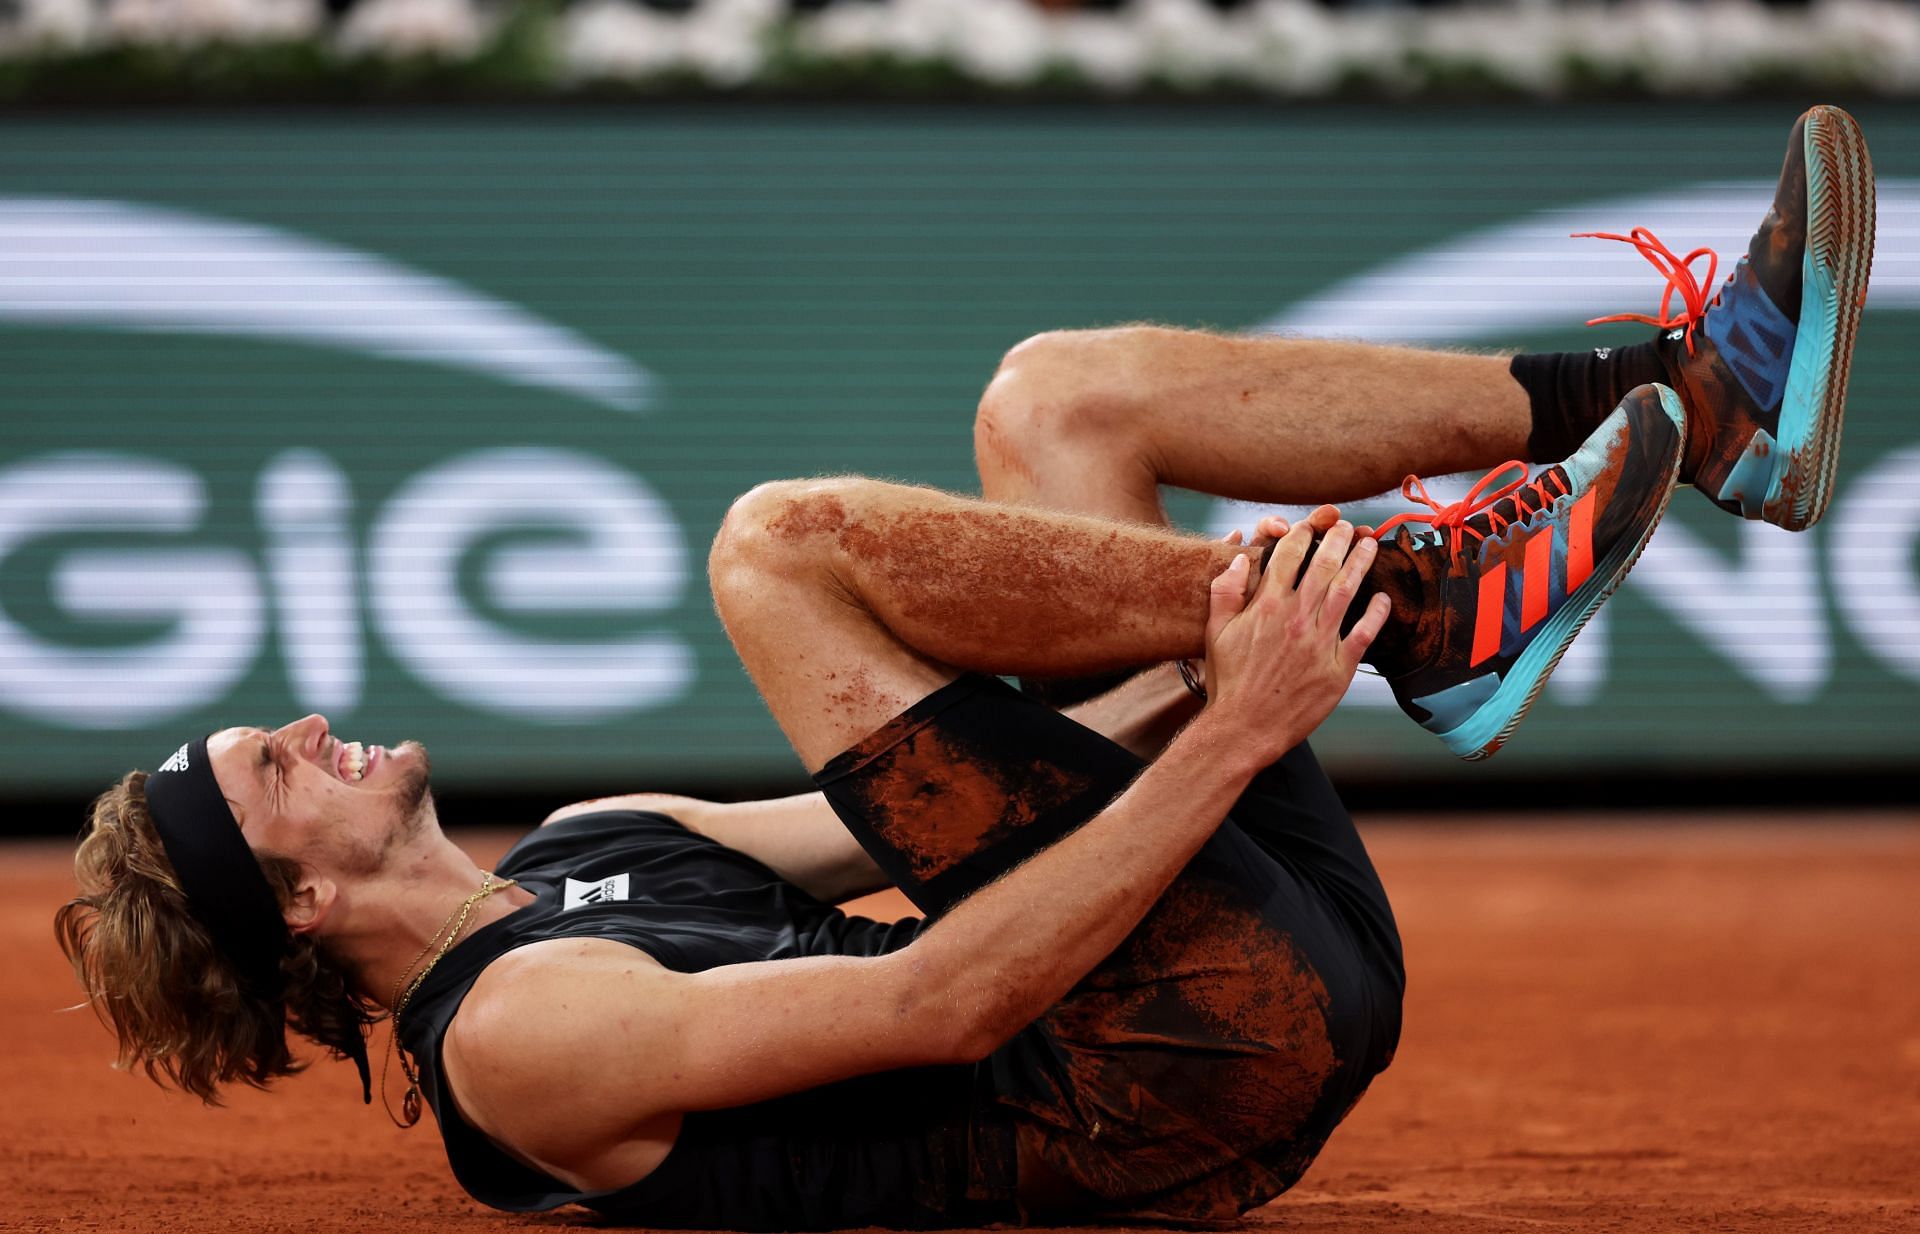 Alexander Zverev after suffering an ankle injury during his 2022 French Open semifinal match against Rafael Nadal